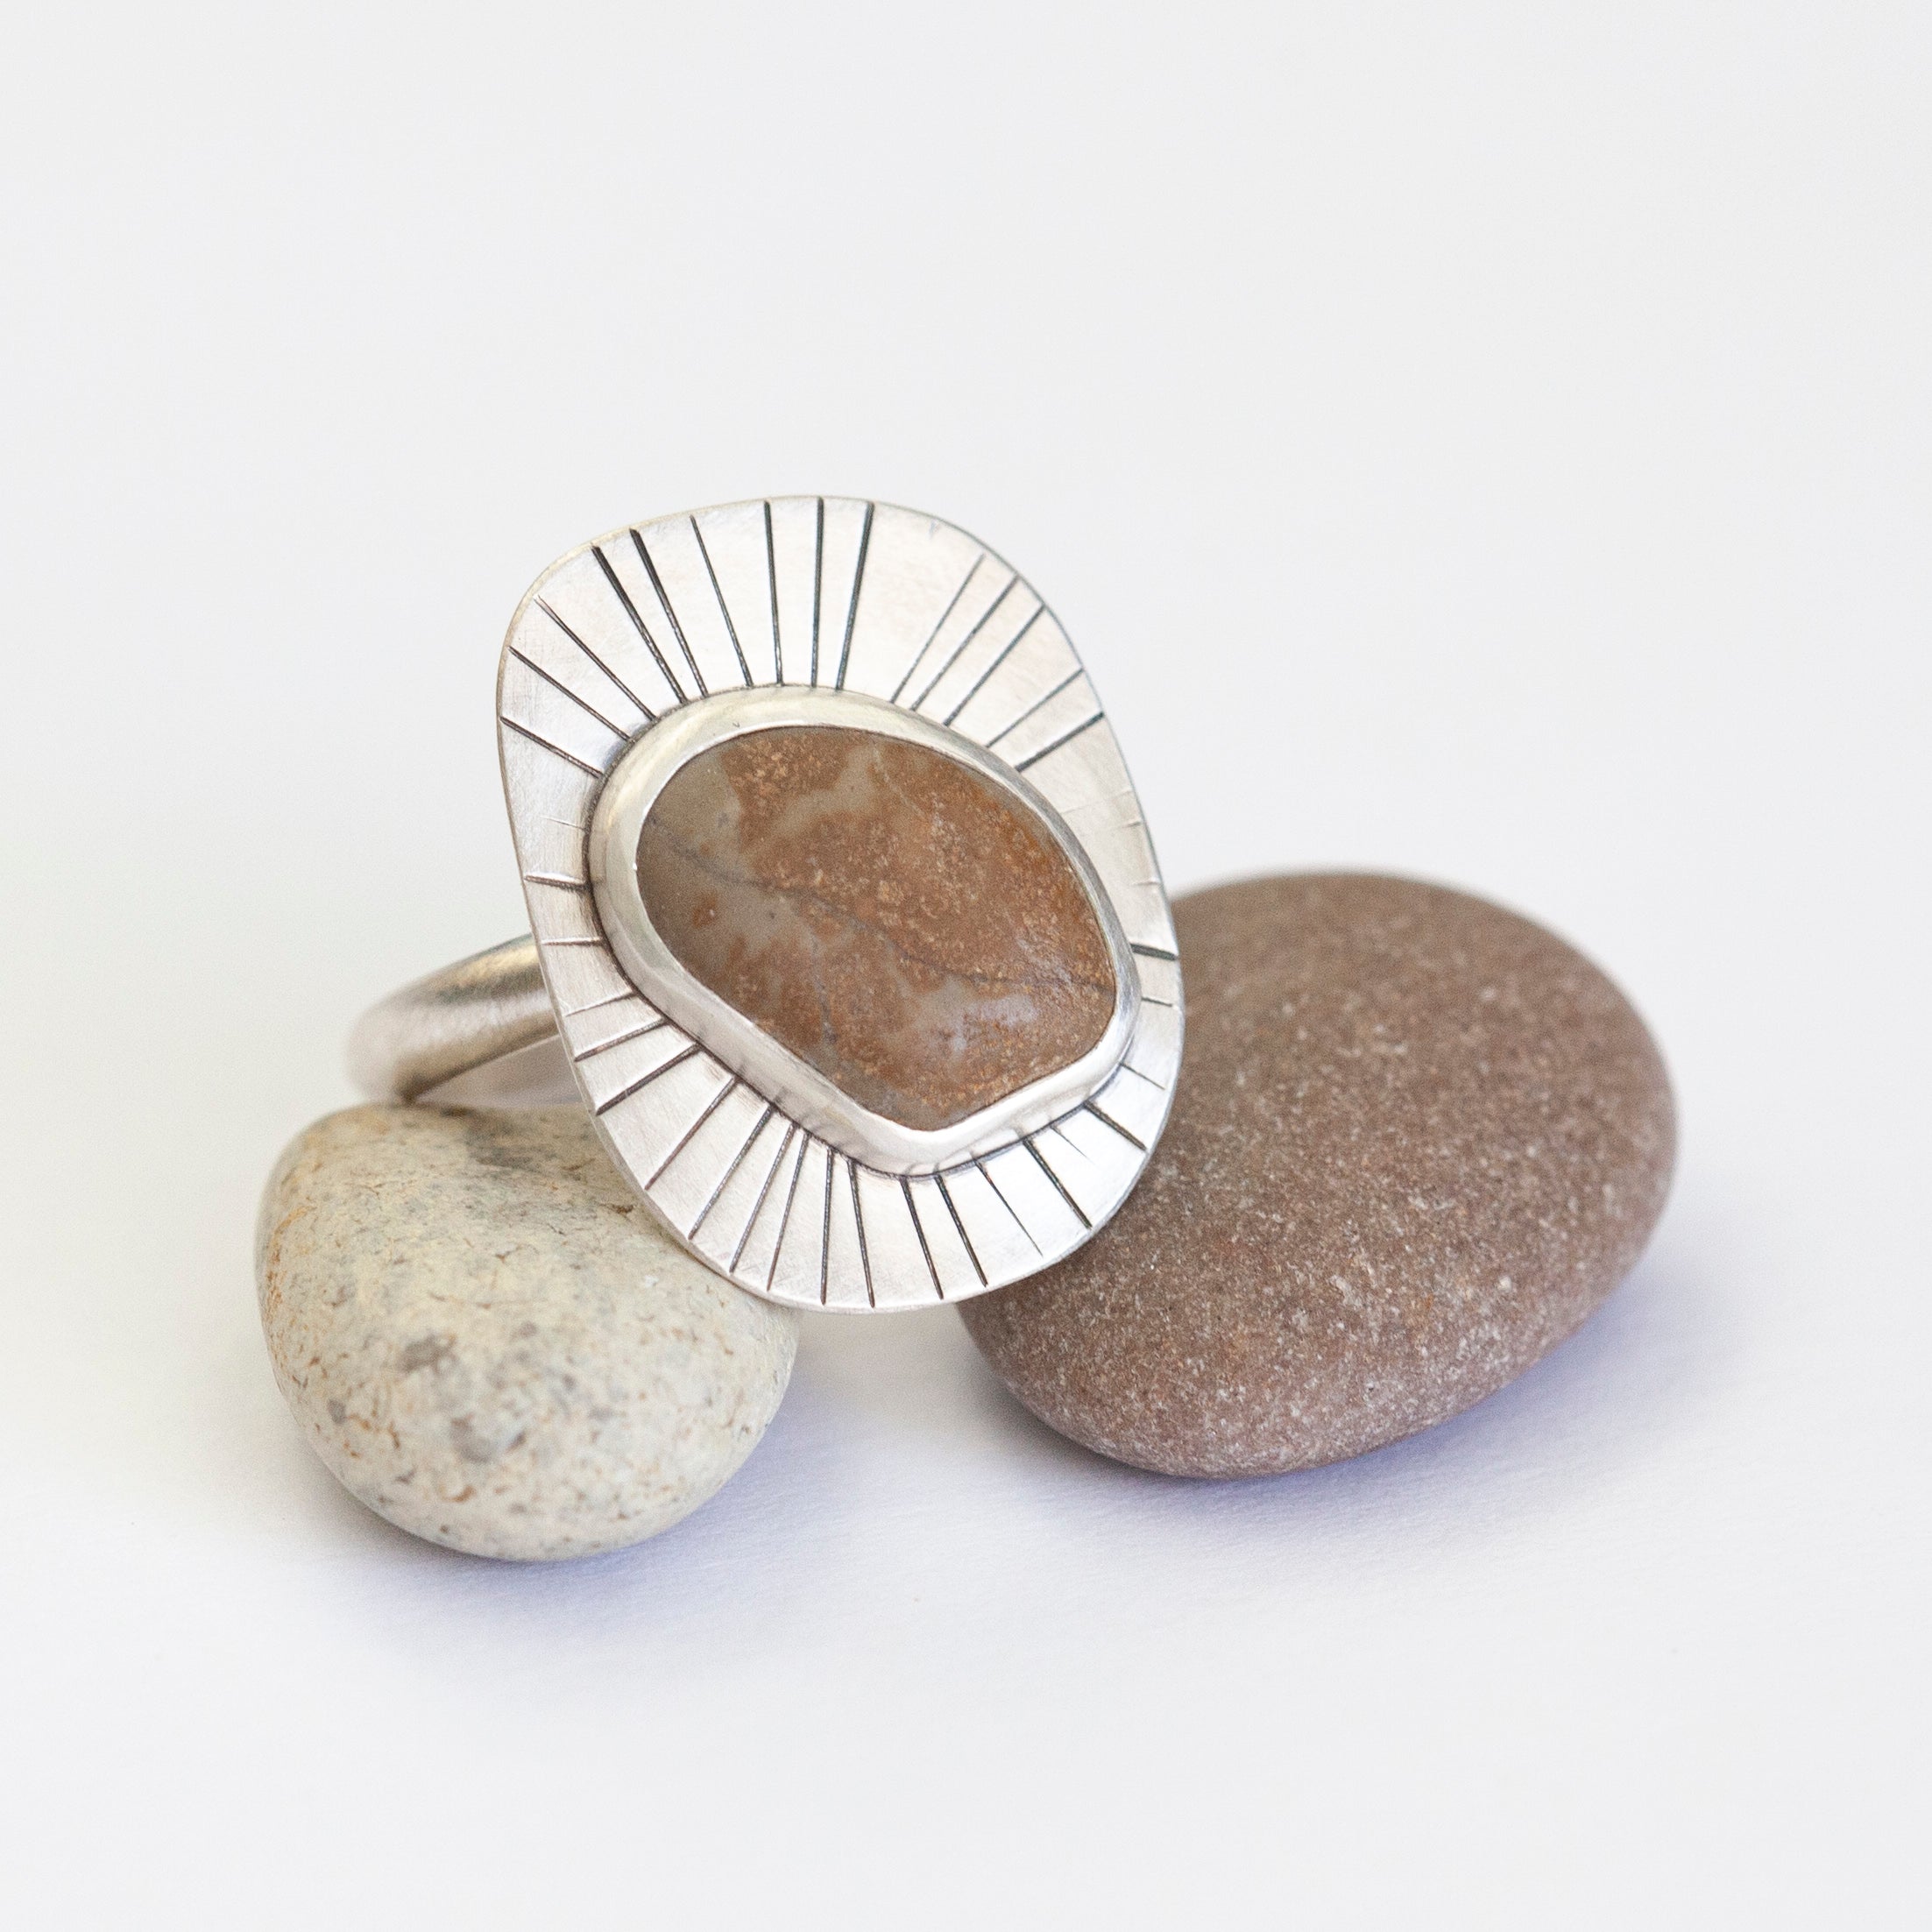 OOAK intuition ring with brown pebble ~ Size 53 (ready-to-ship)